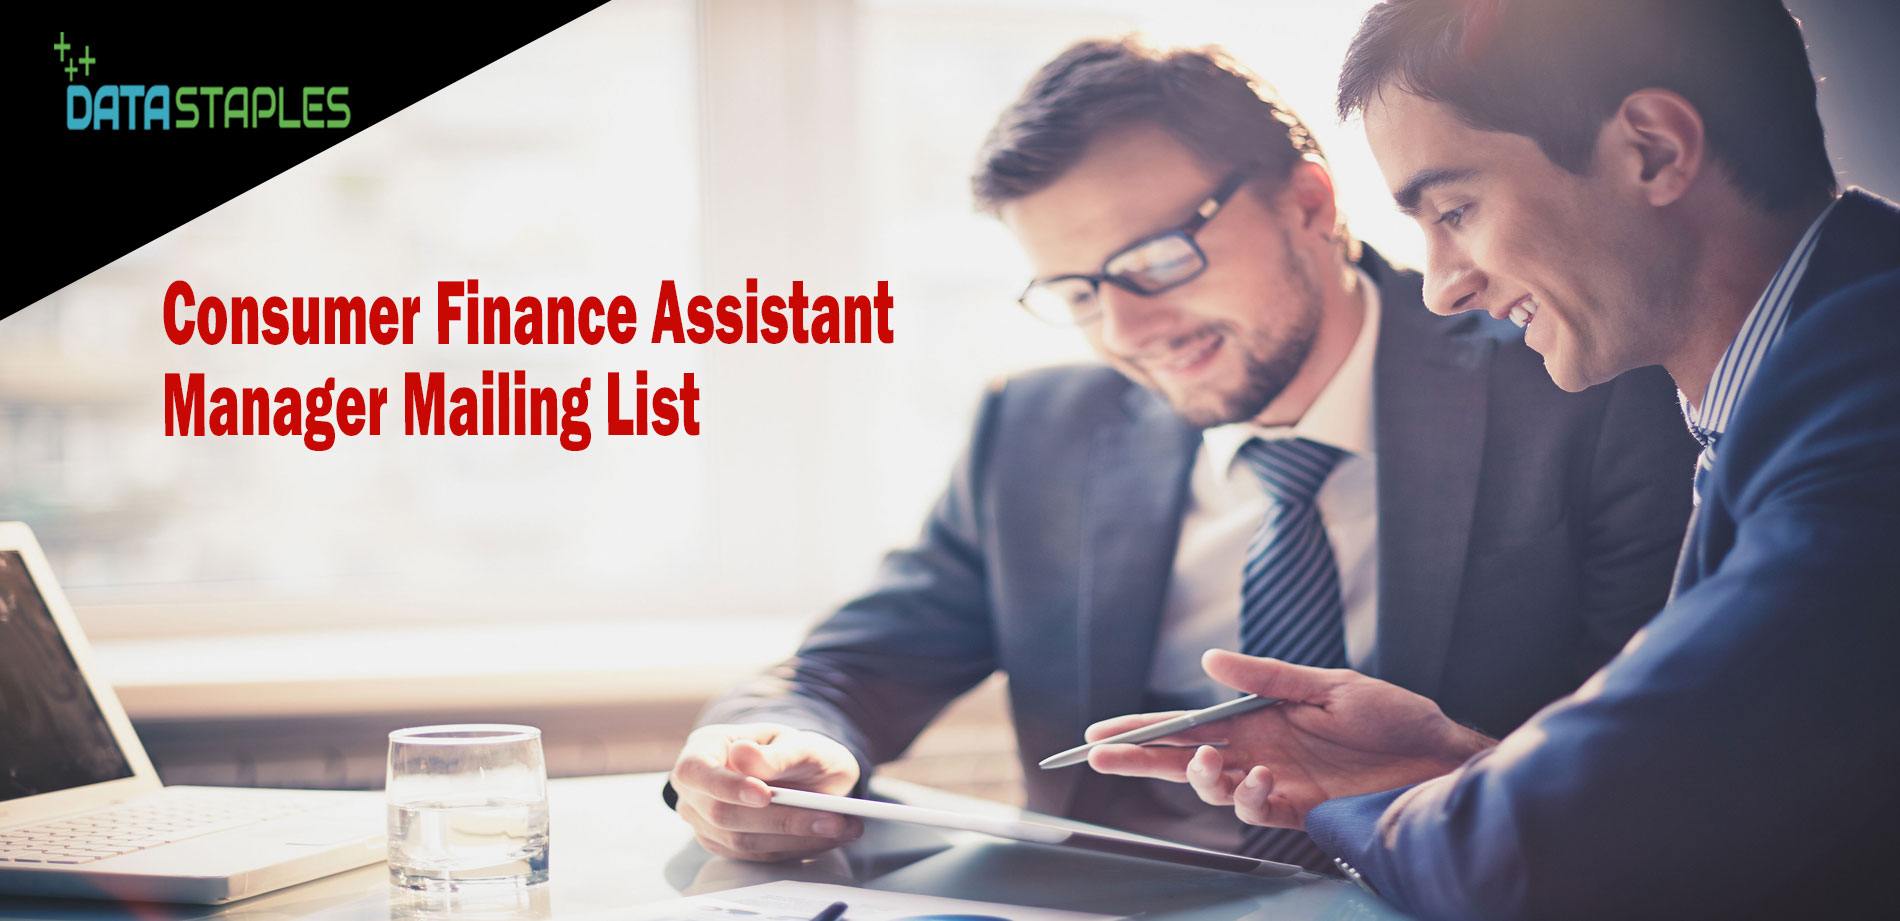 Consumer Finance Assistant Manager Mailing List | DataStaples